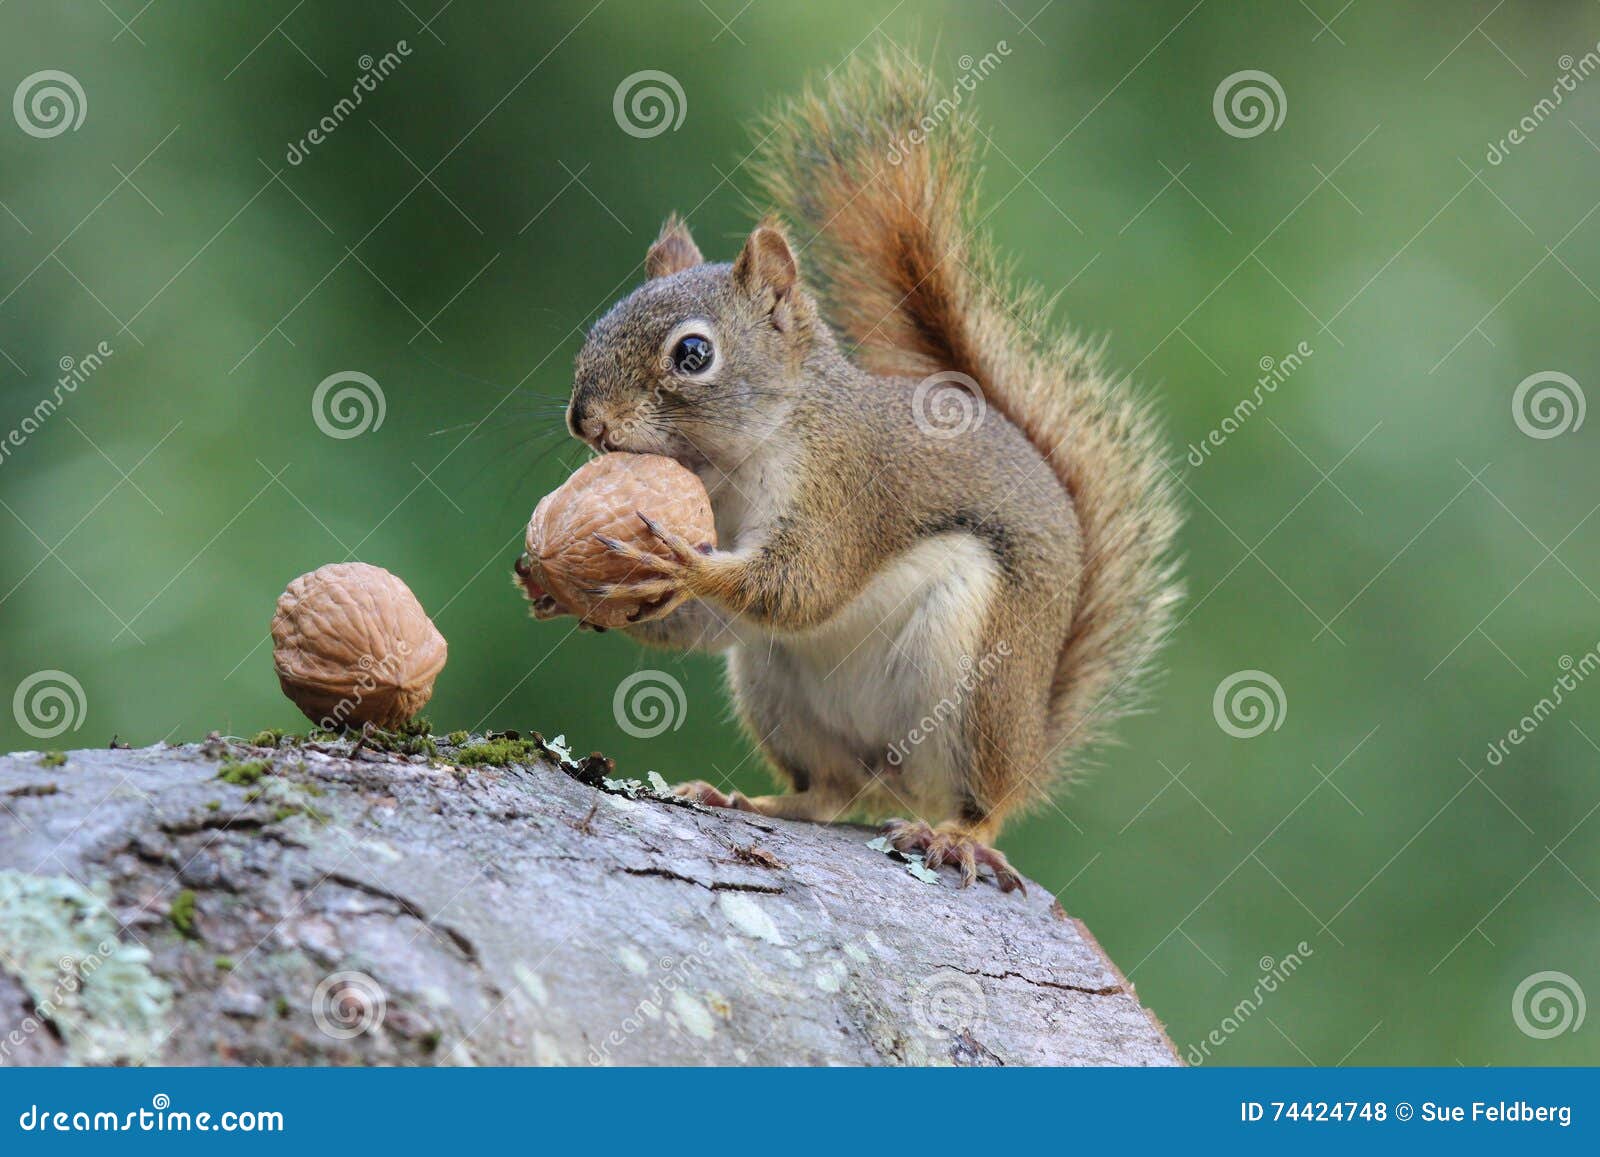 squirrel holds a nut